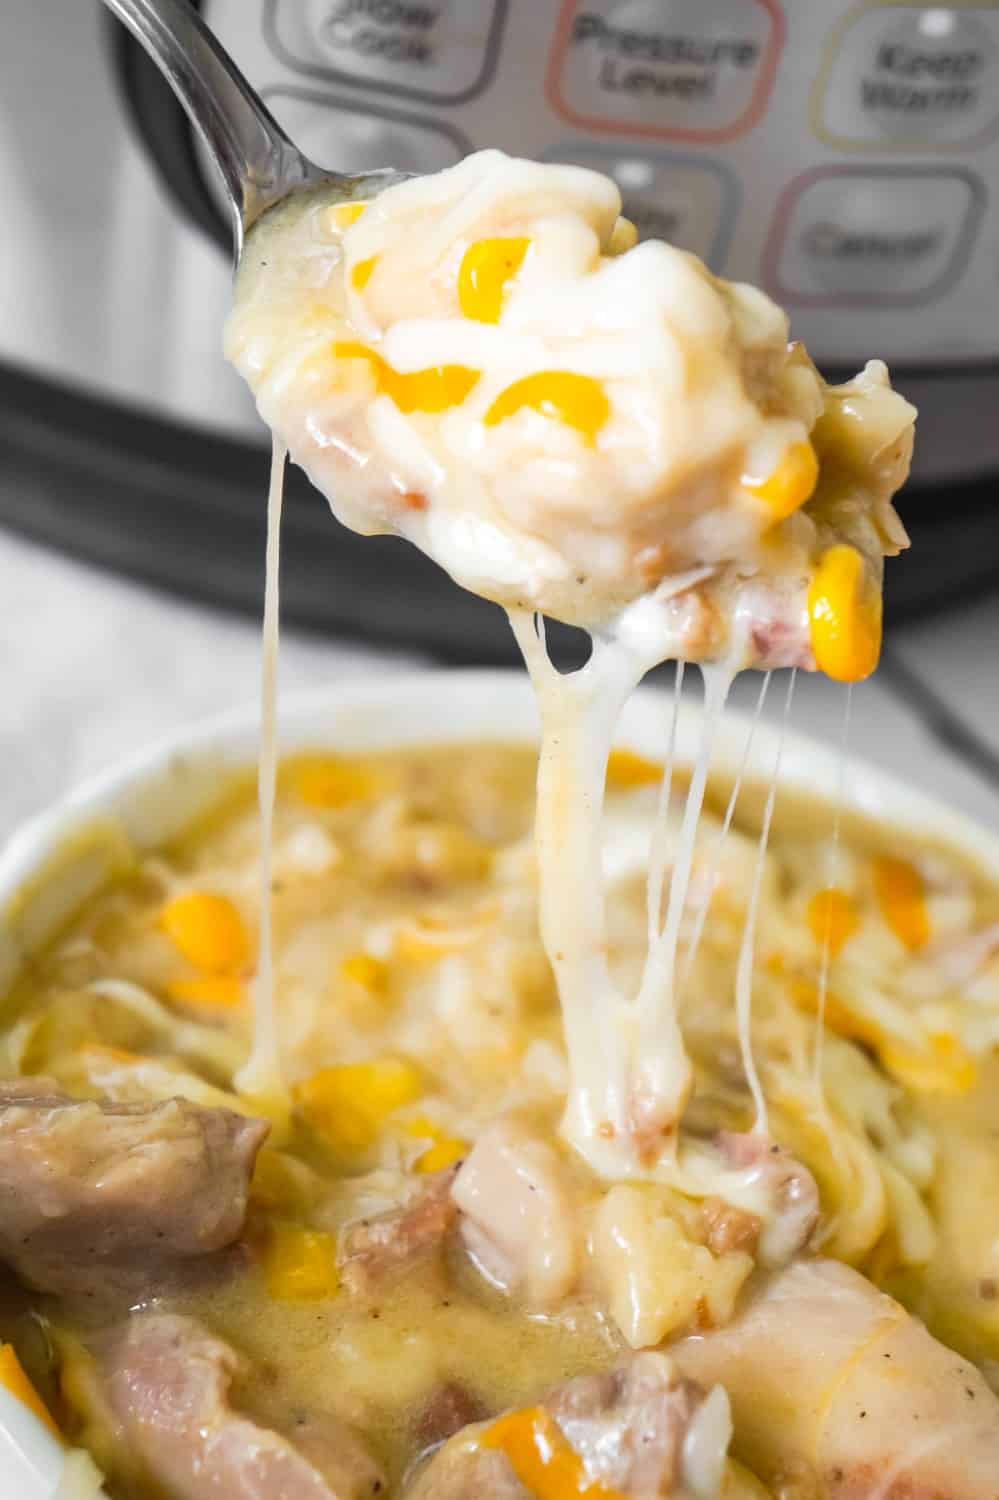 Instant Pot Chicken and Dumplings is an easy dinner recipe using boneless, skinless chicken thighs. This chicken and dumpling recipe uses Pillsbury refrigerated biscuit dough and is loaded with cheese and bacon.